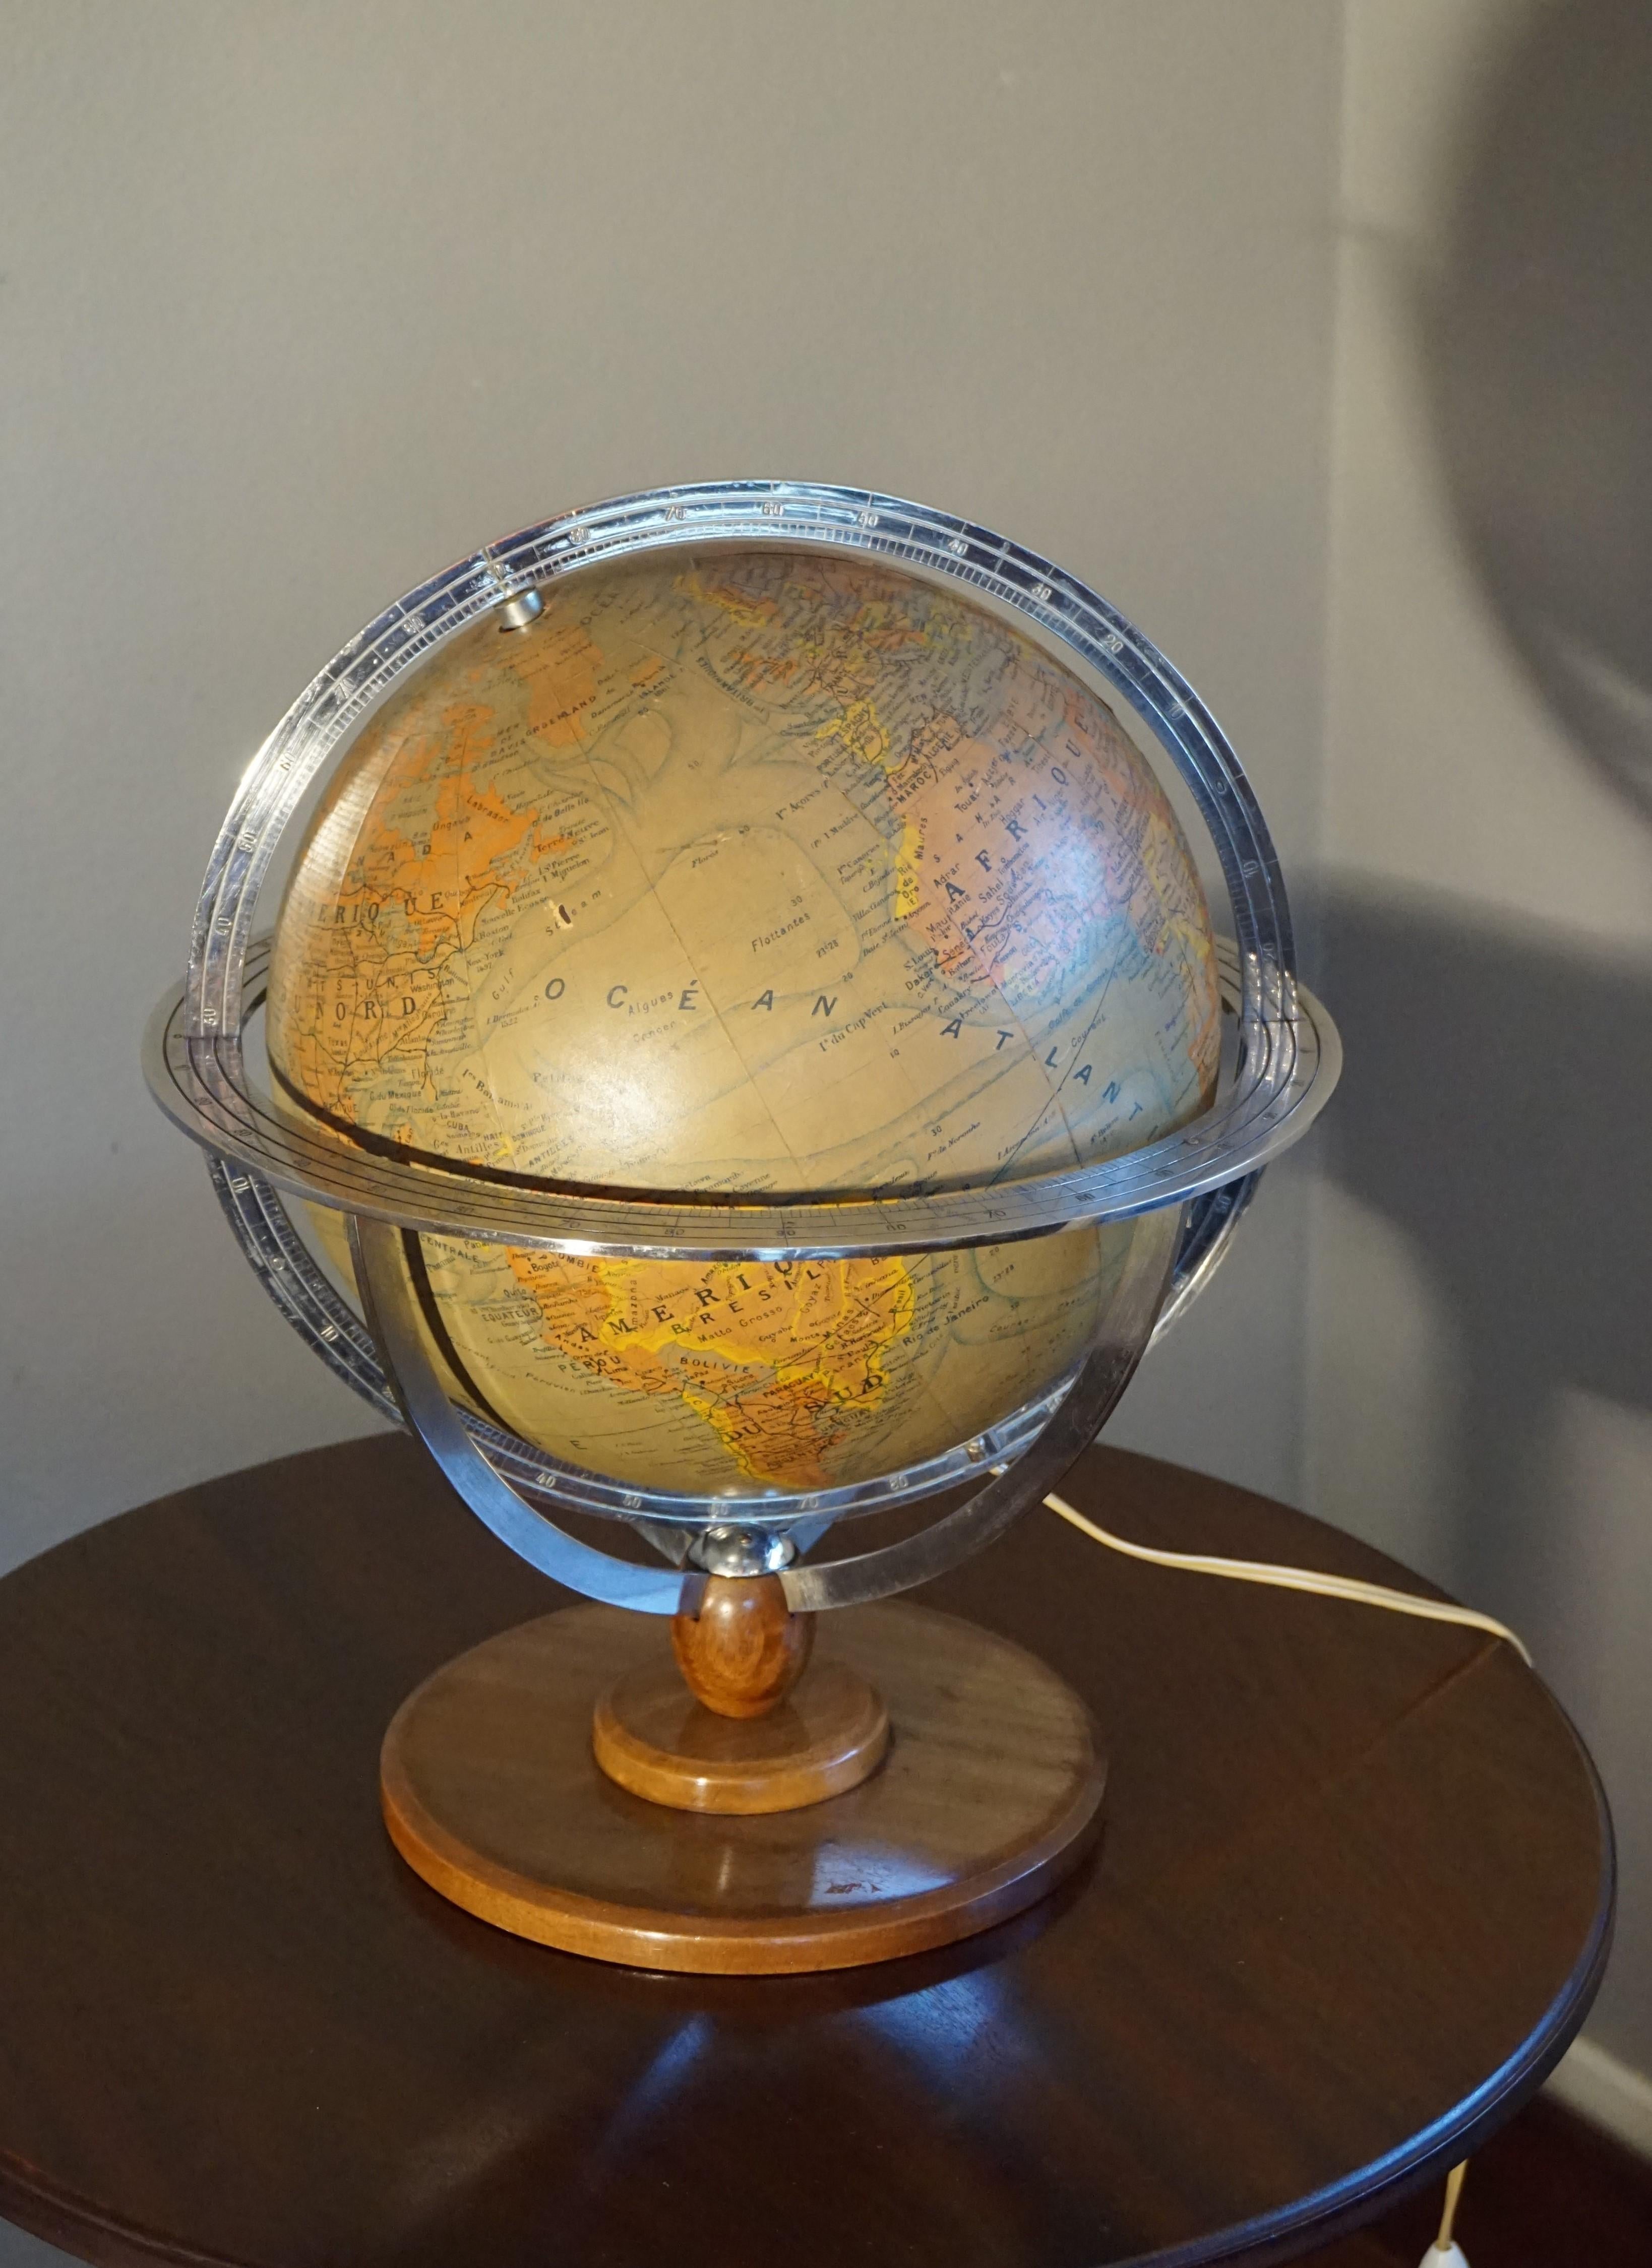 Glass Stylish Mid-20th Century Made, Parisian Terrestrial Desk / Table Globe with Lamp For Sale